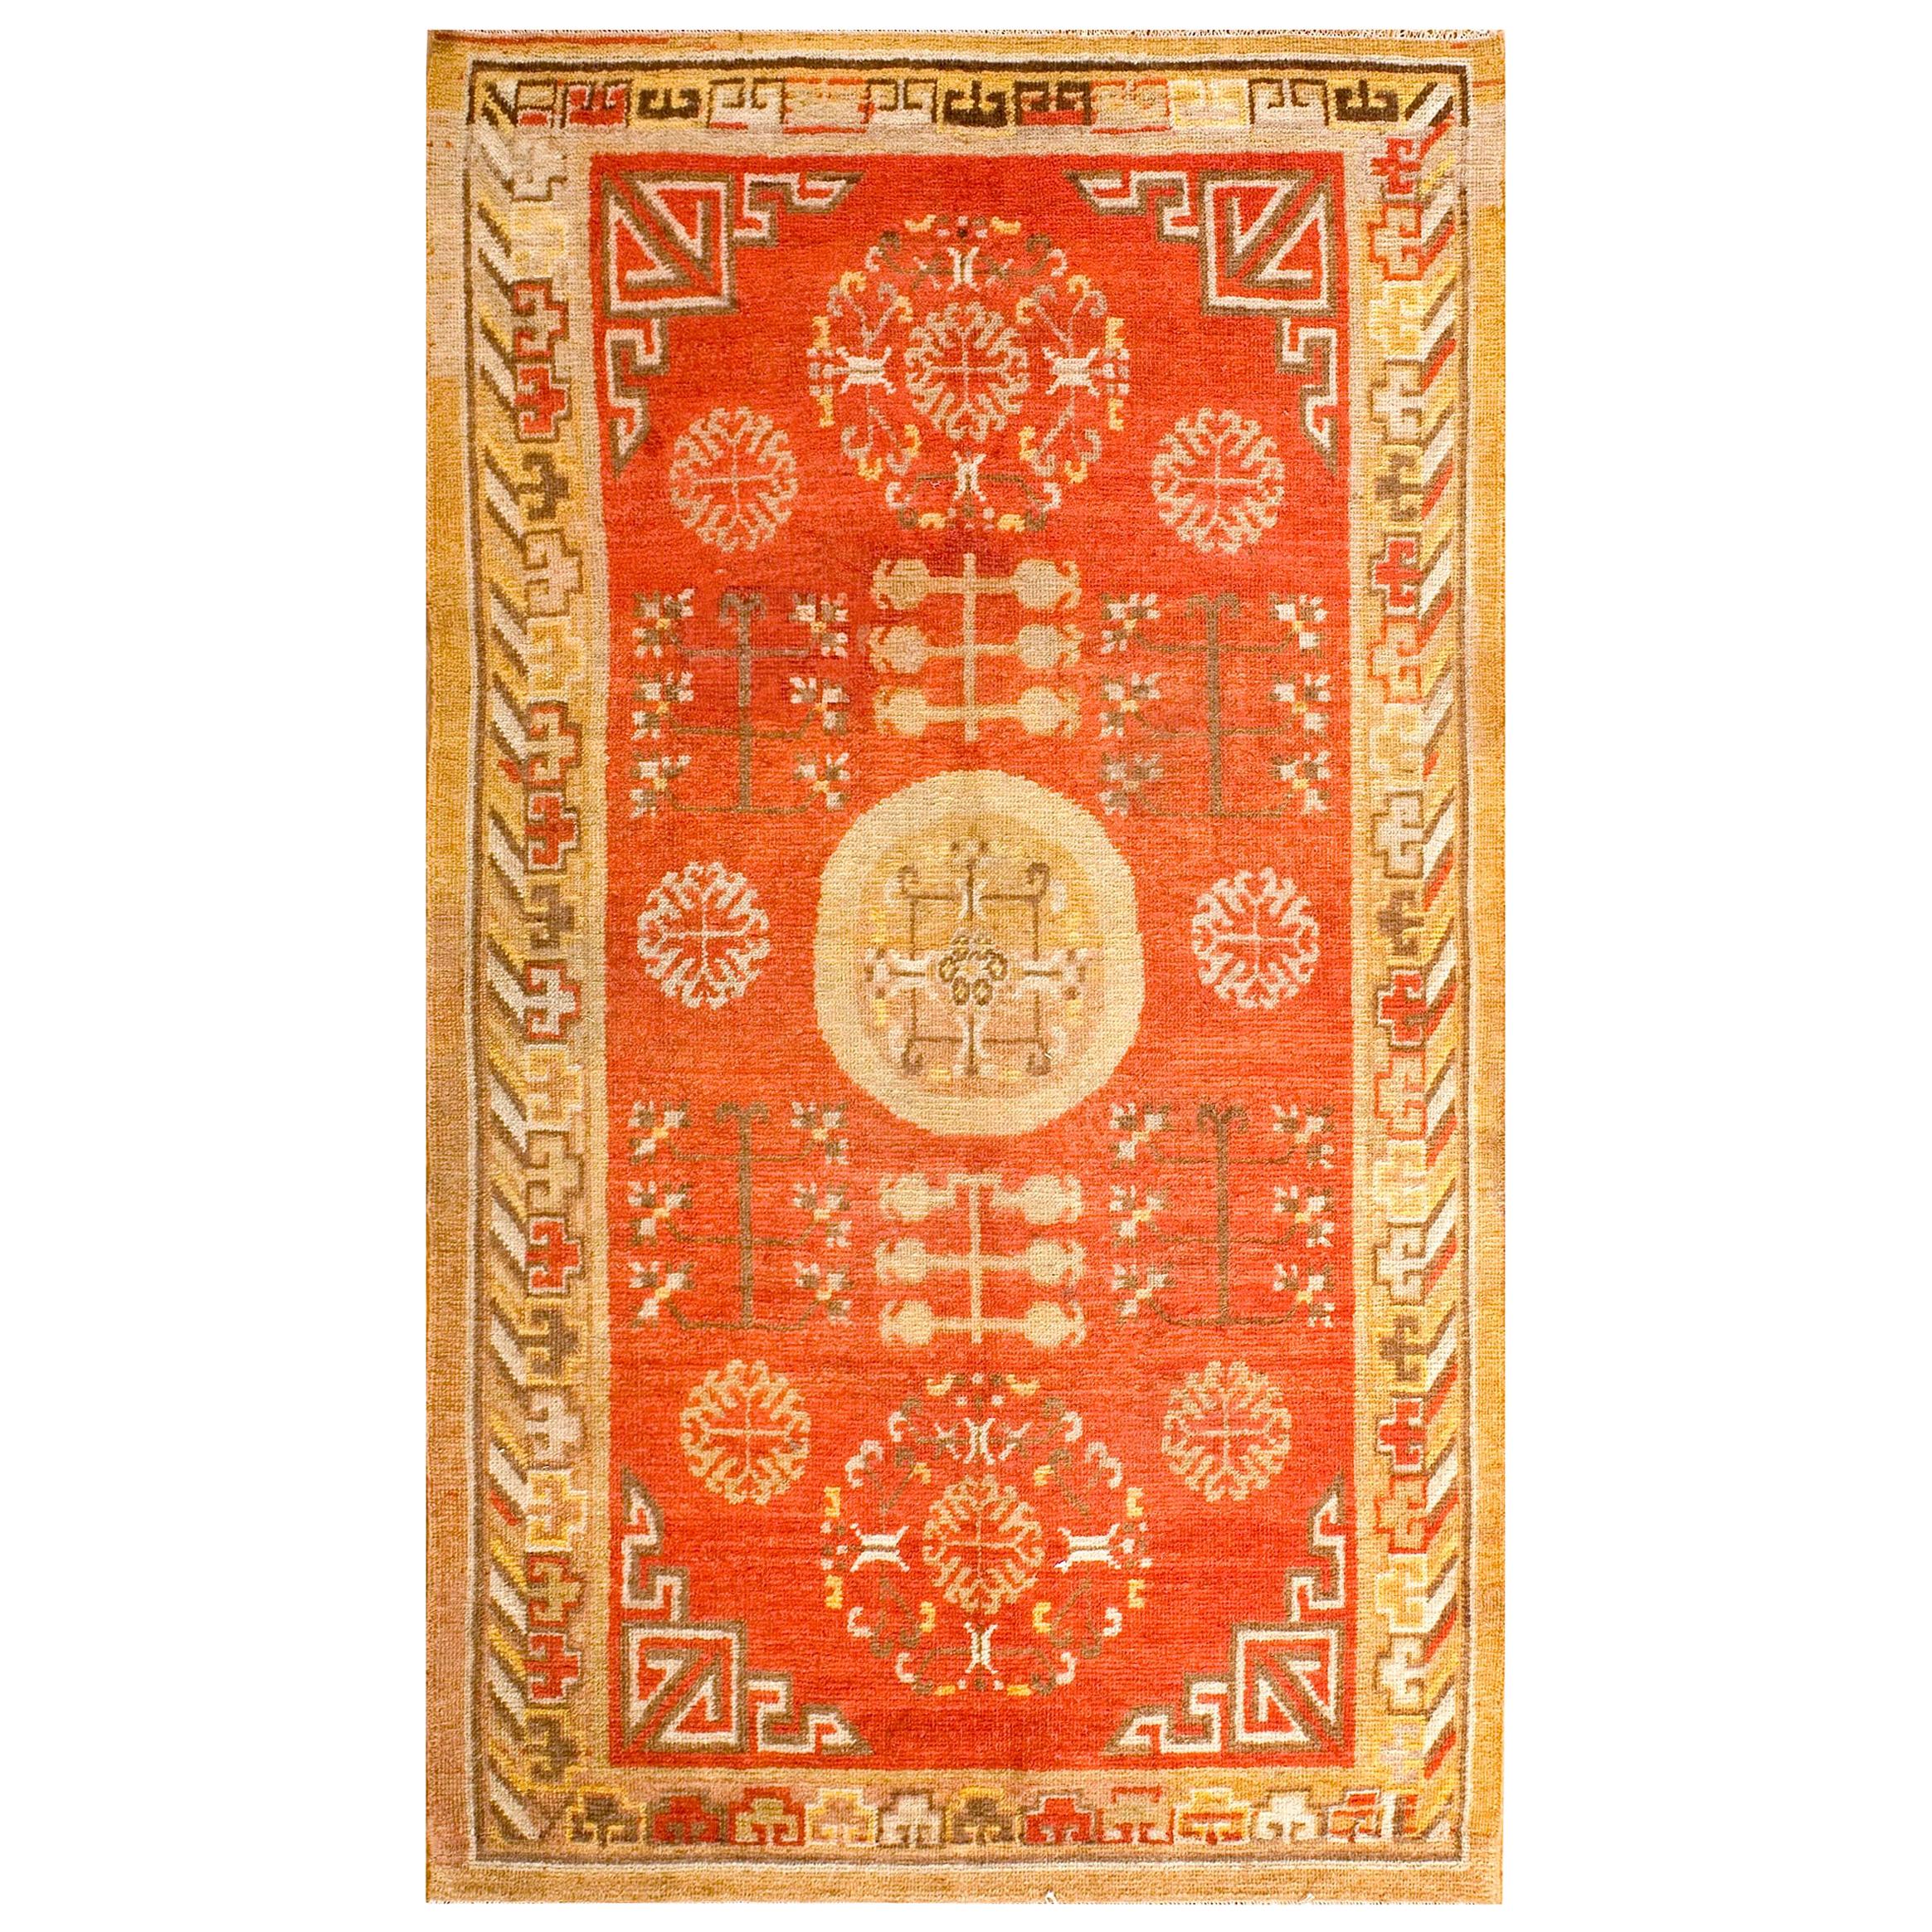 Early 20th Century Central Asian Chinese Khotan Carpet ( 4' x 7' - 122 x 213 )